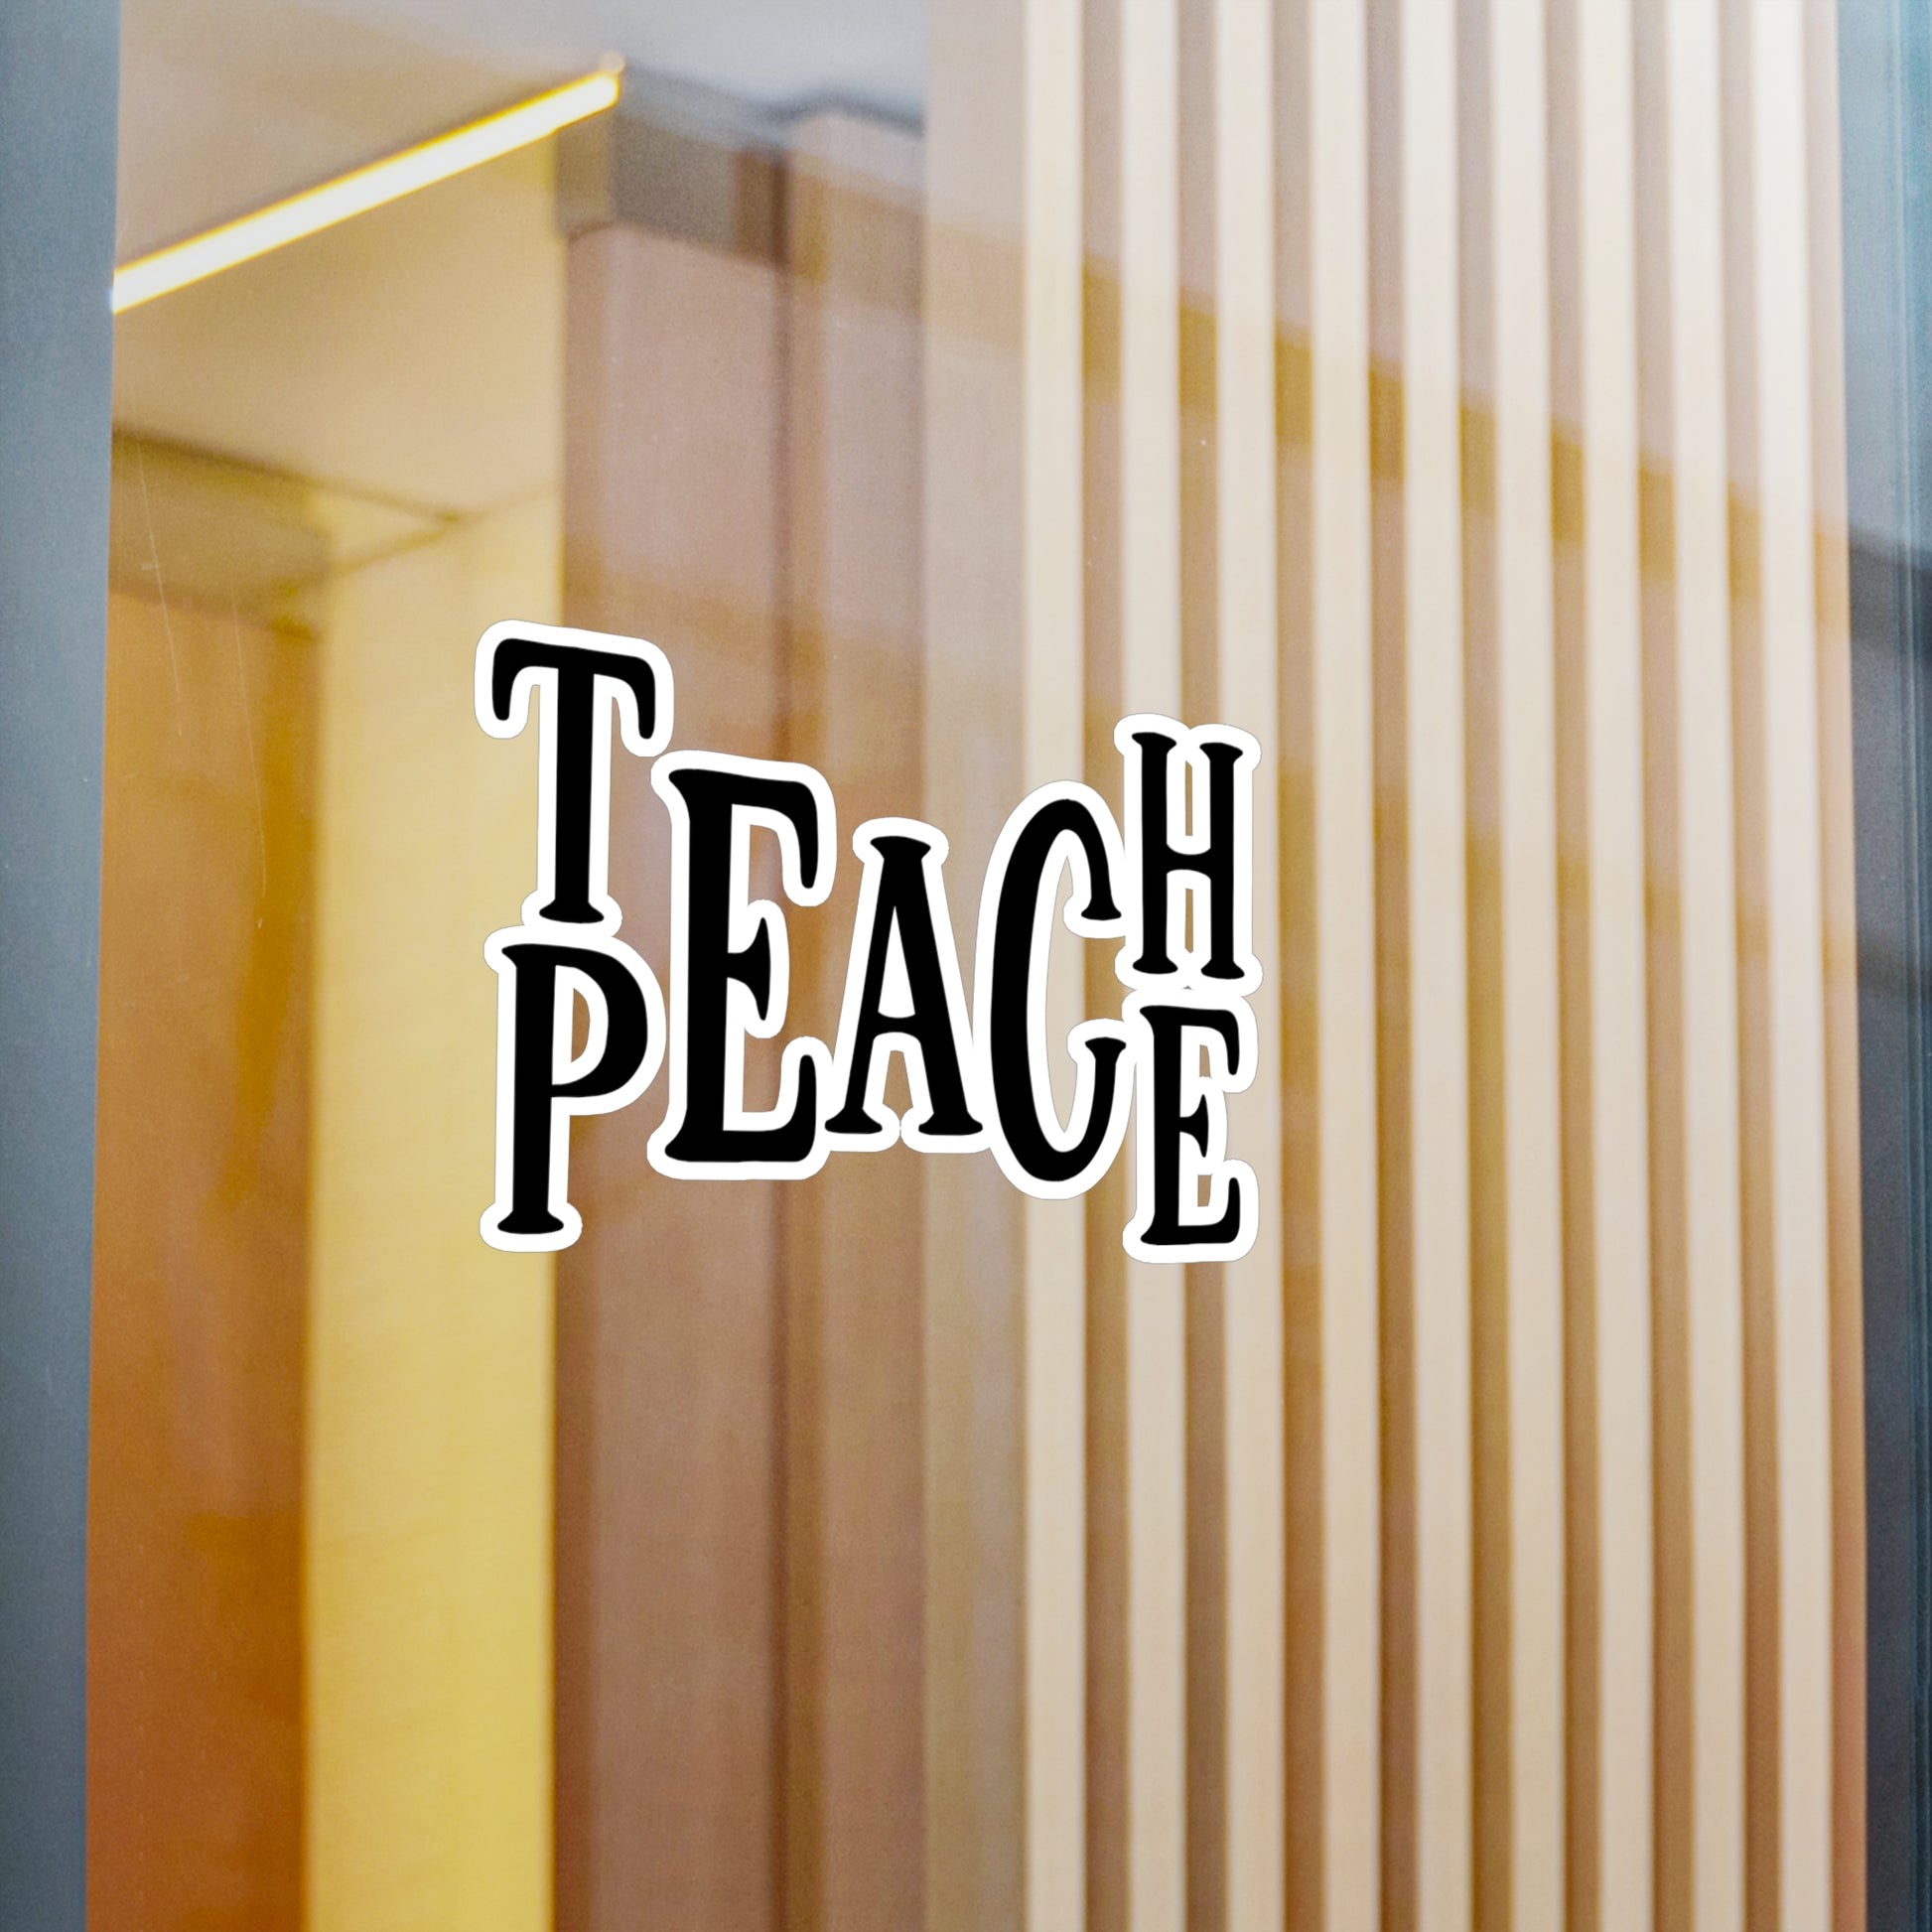 "Teach Peace" Kiss-Cut Vinyl Decal - Weave Got Gifts - Unique Gifts You Won’t Find Anywhere Else!